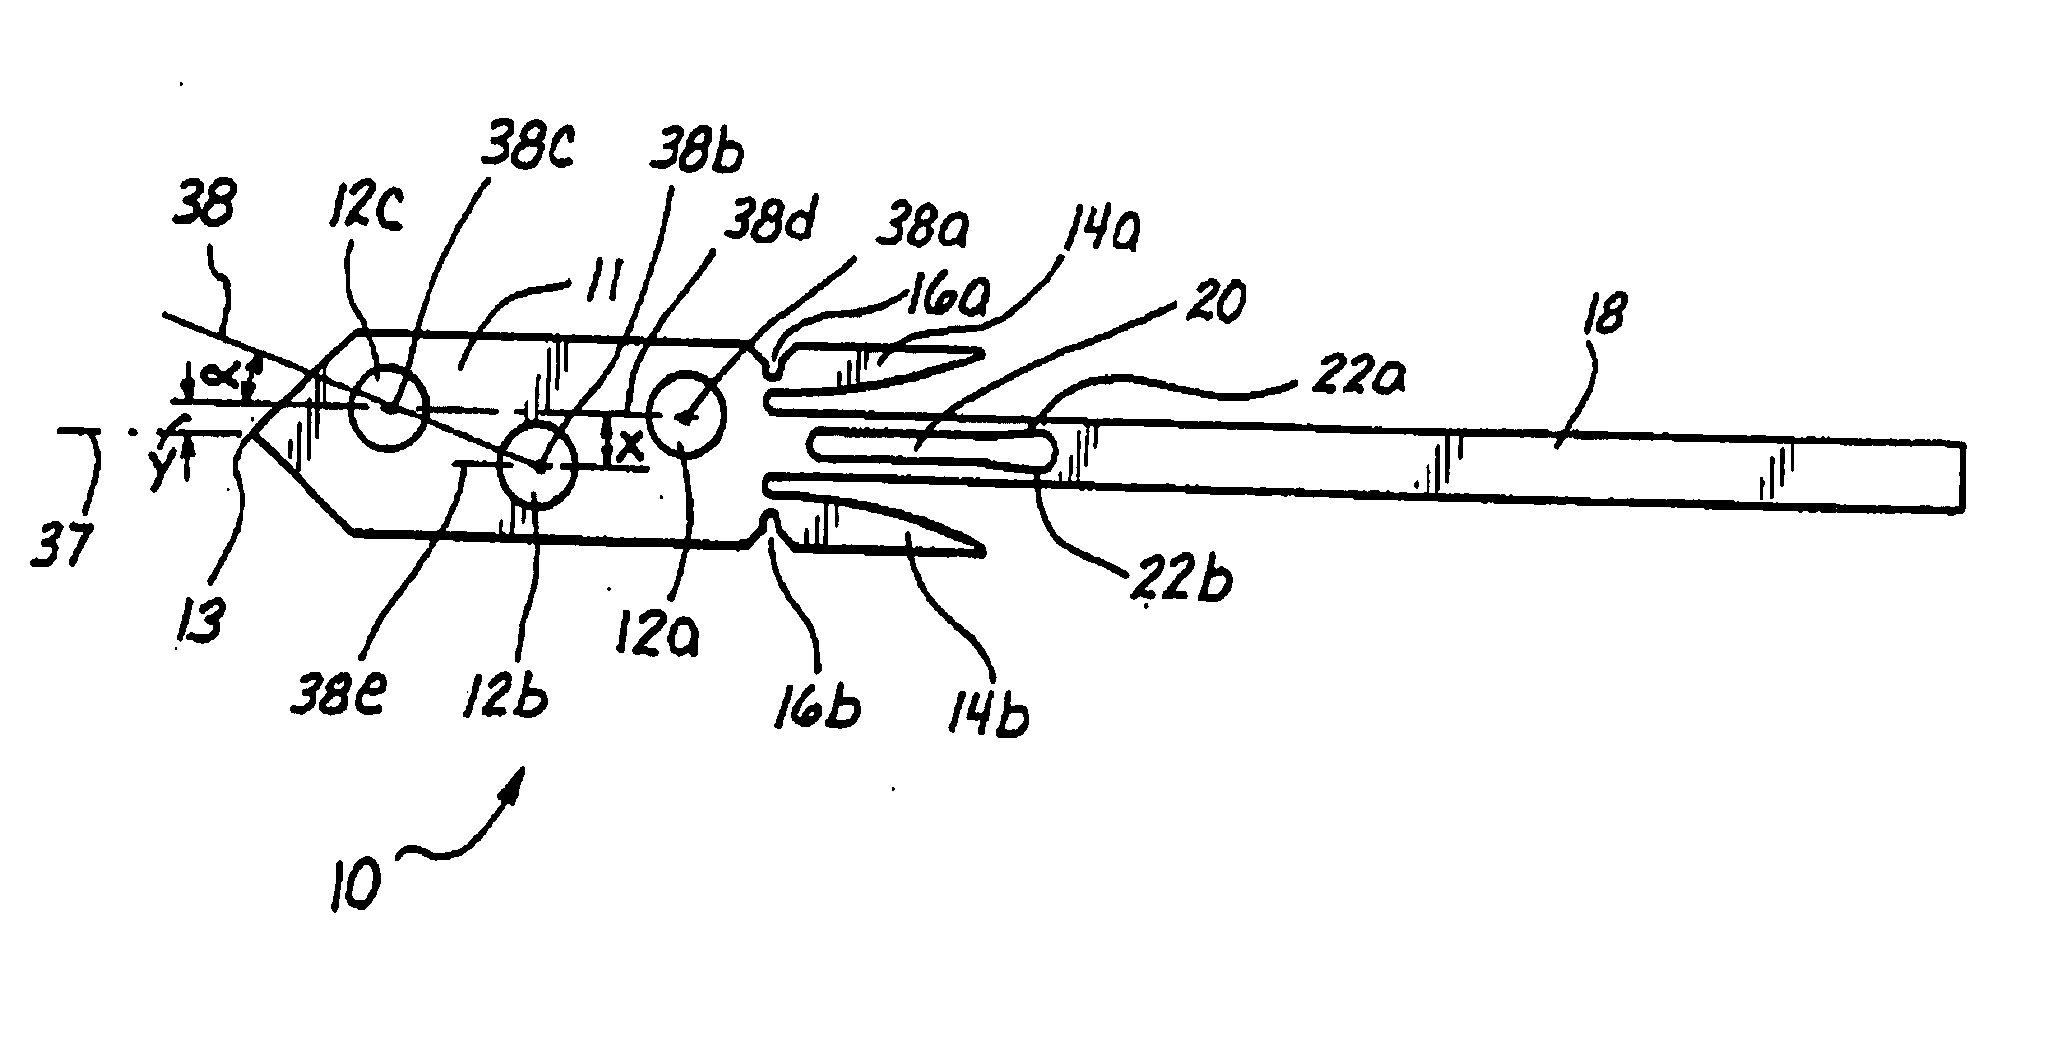 Knotless suture lock and bone anchor implant method